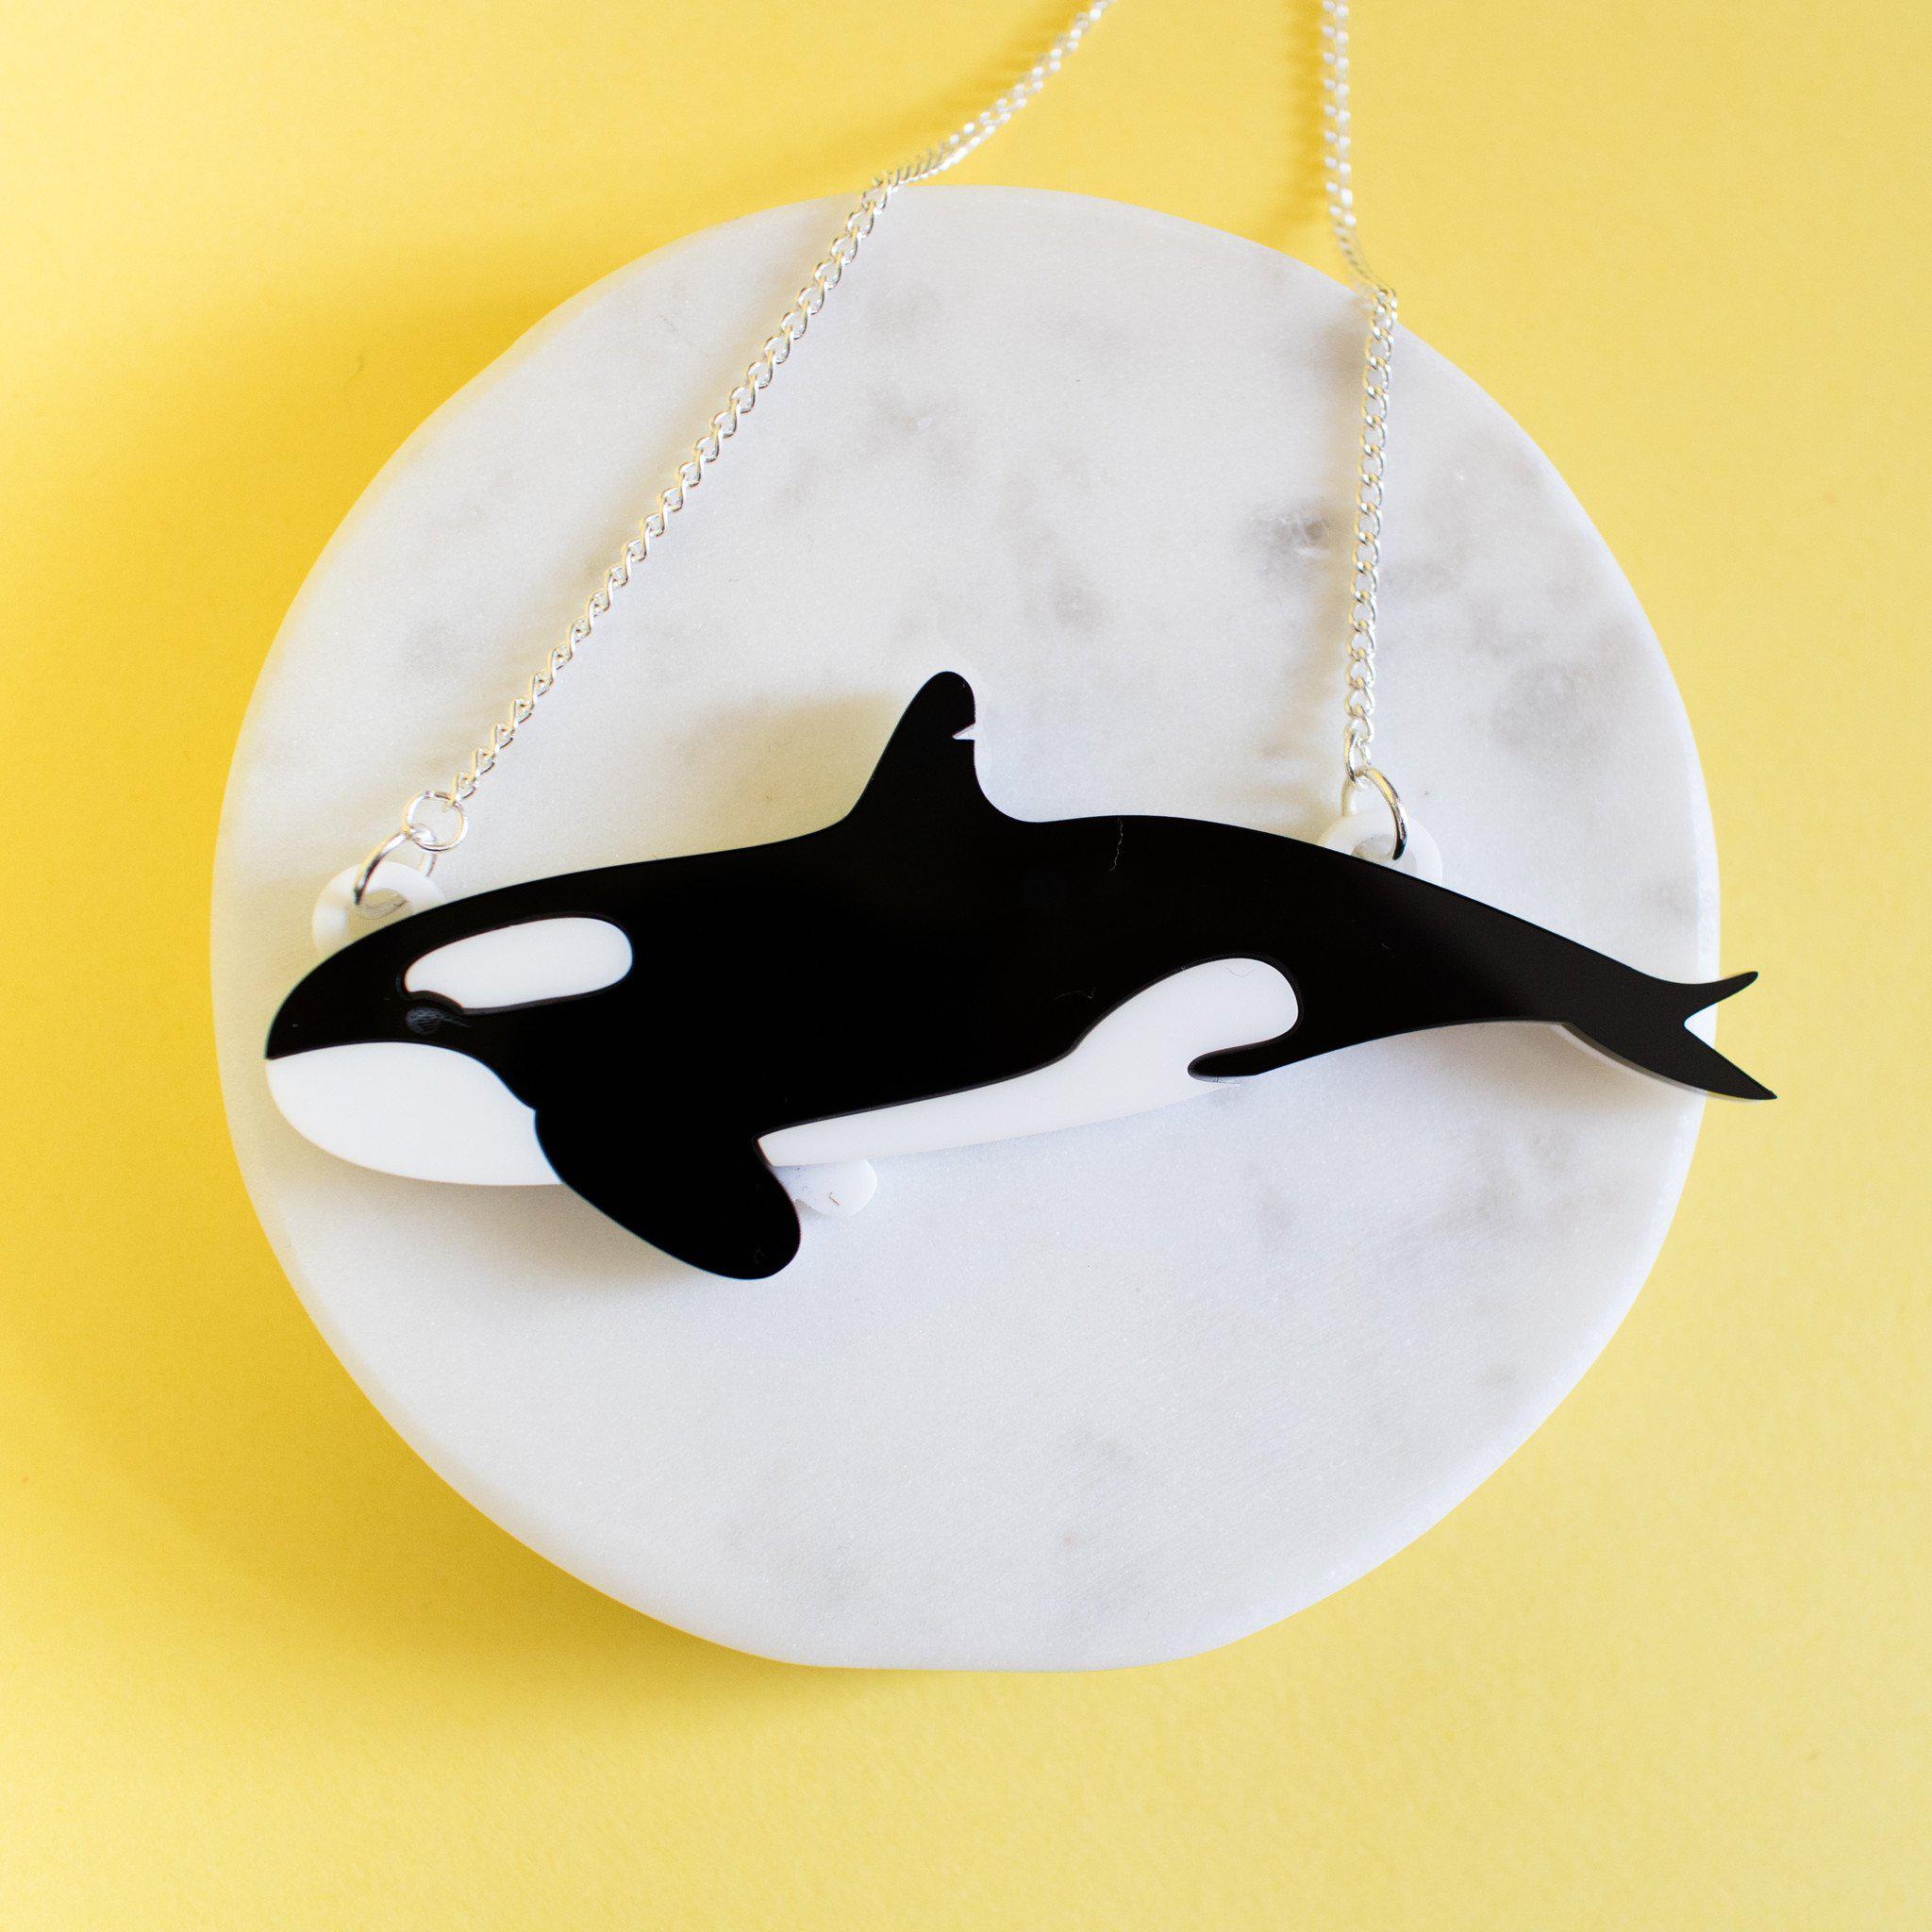 Orca Necklace - Finest Imaginary